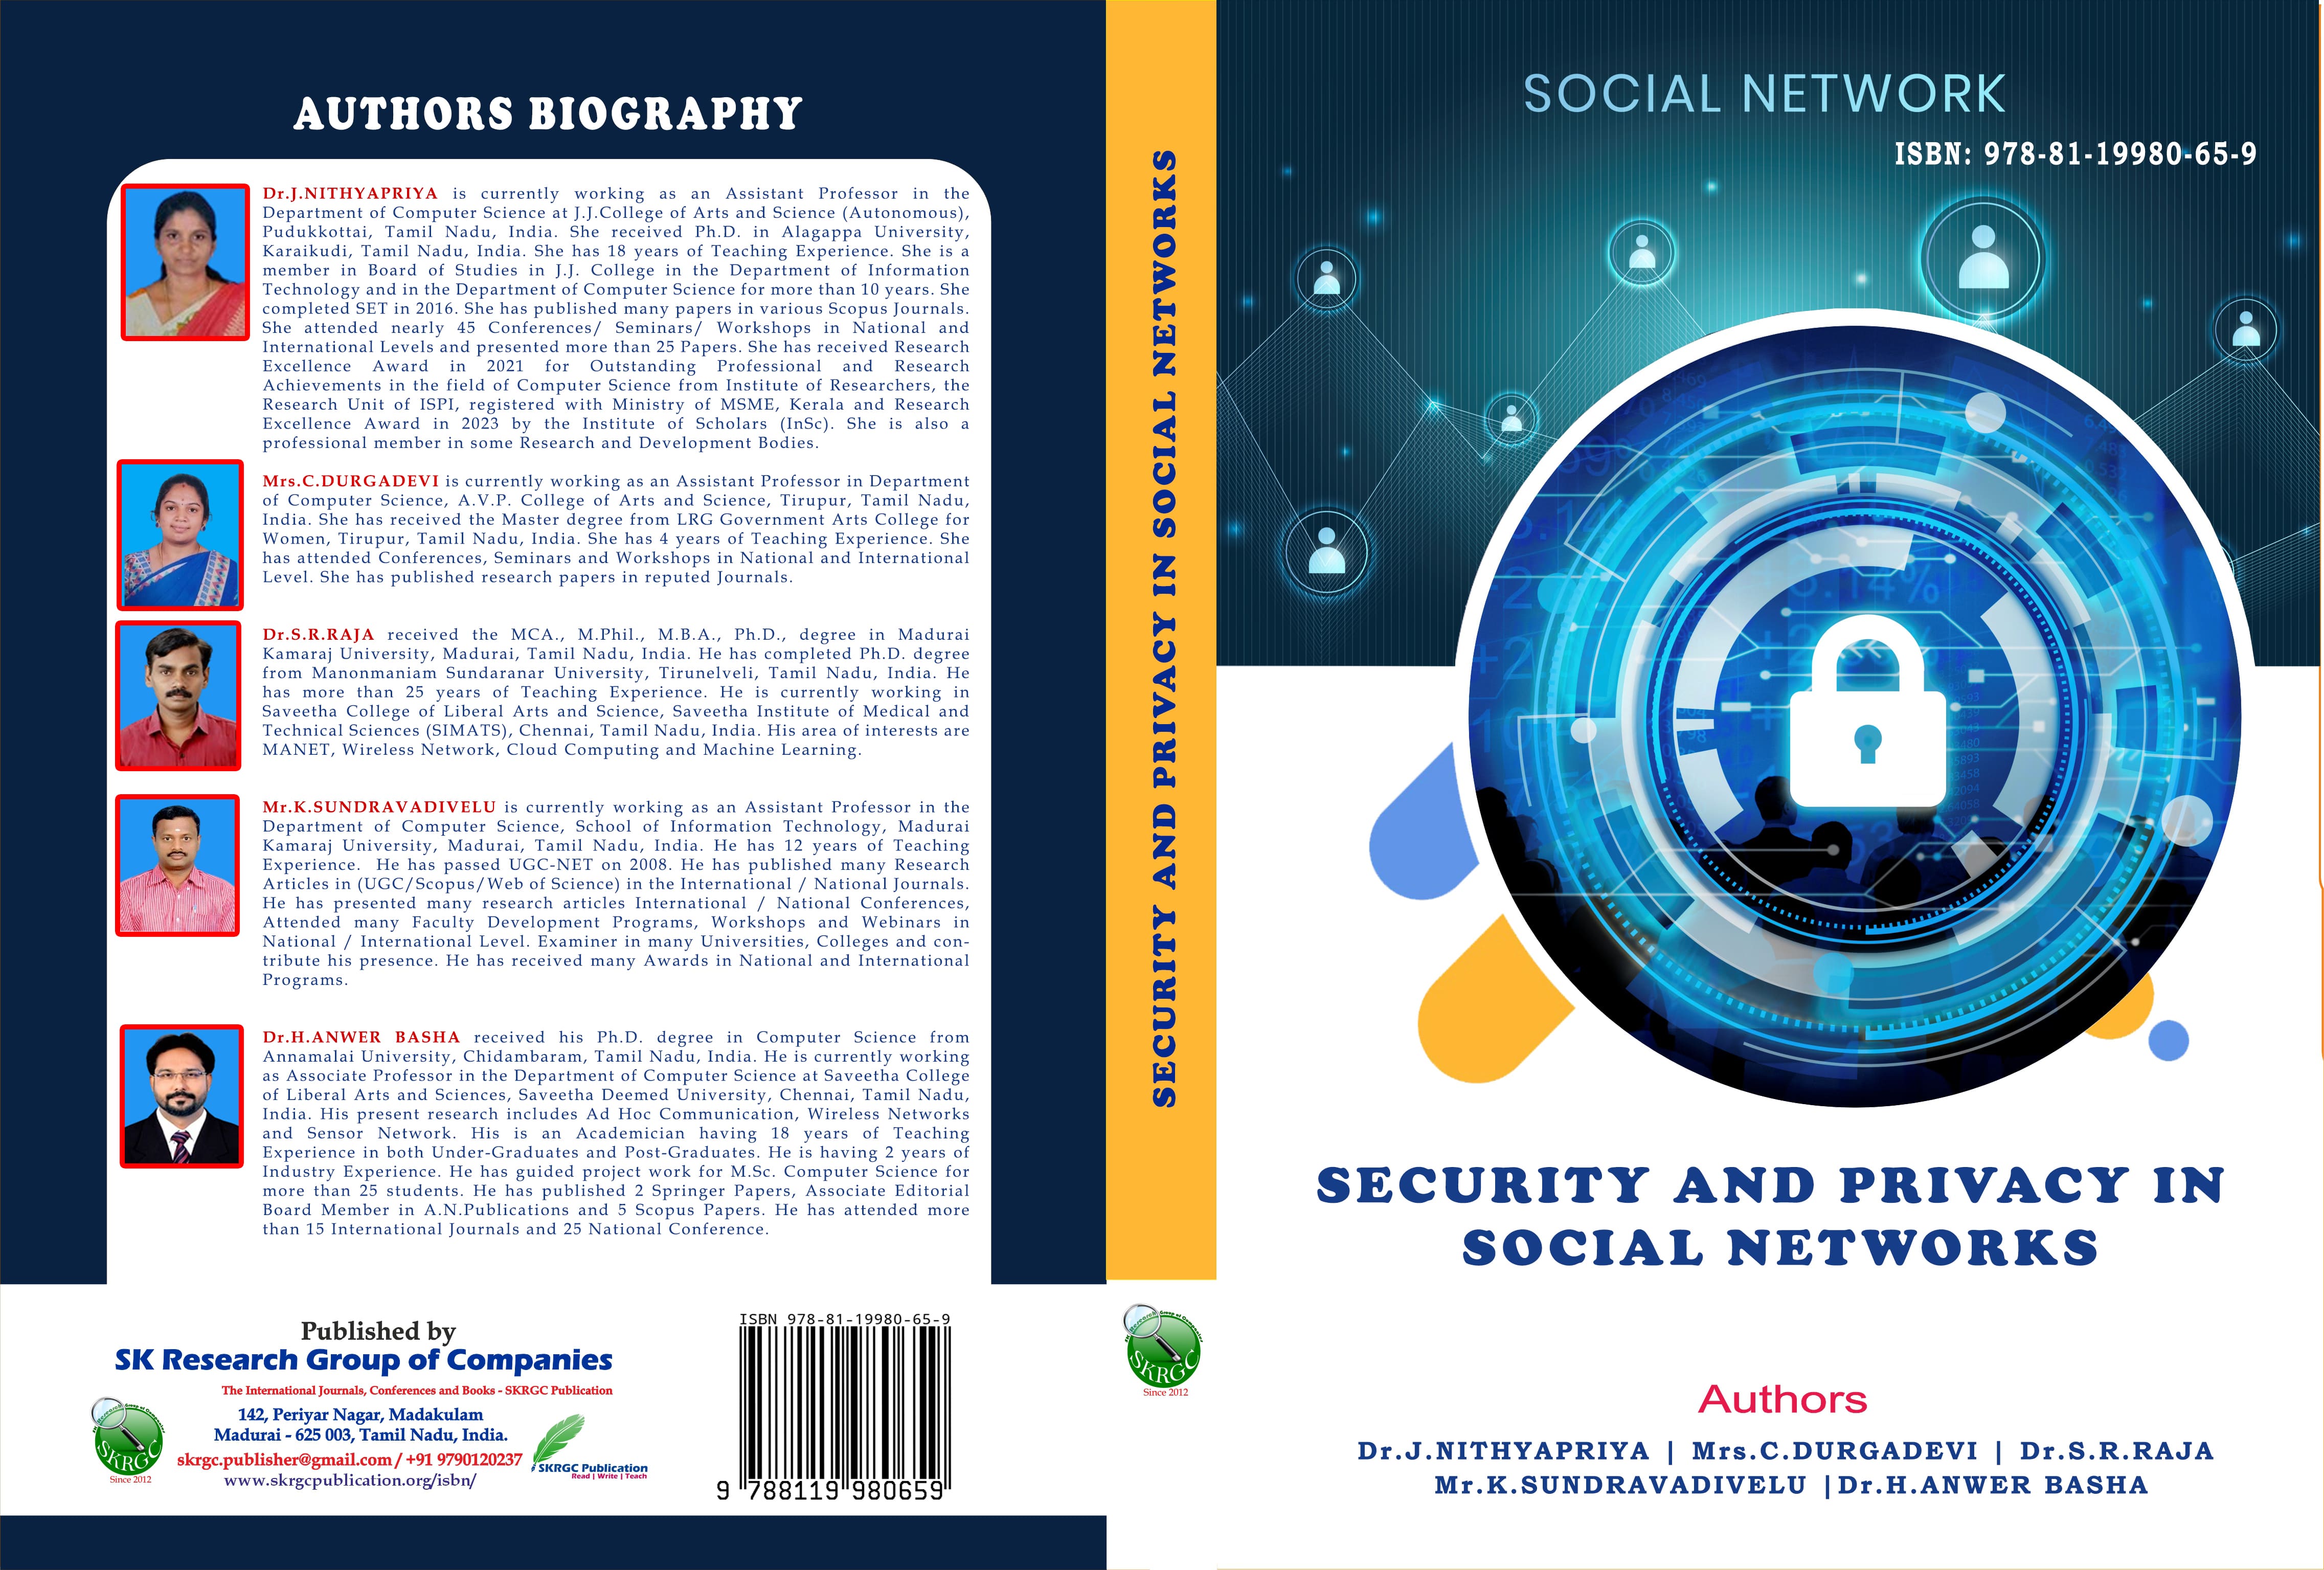 Security and Privacy in Social Networks